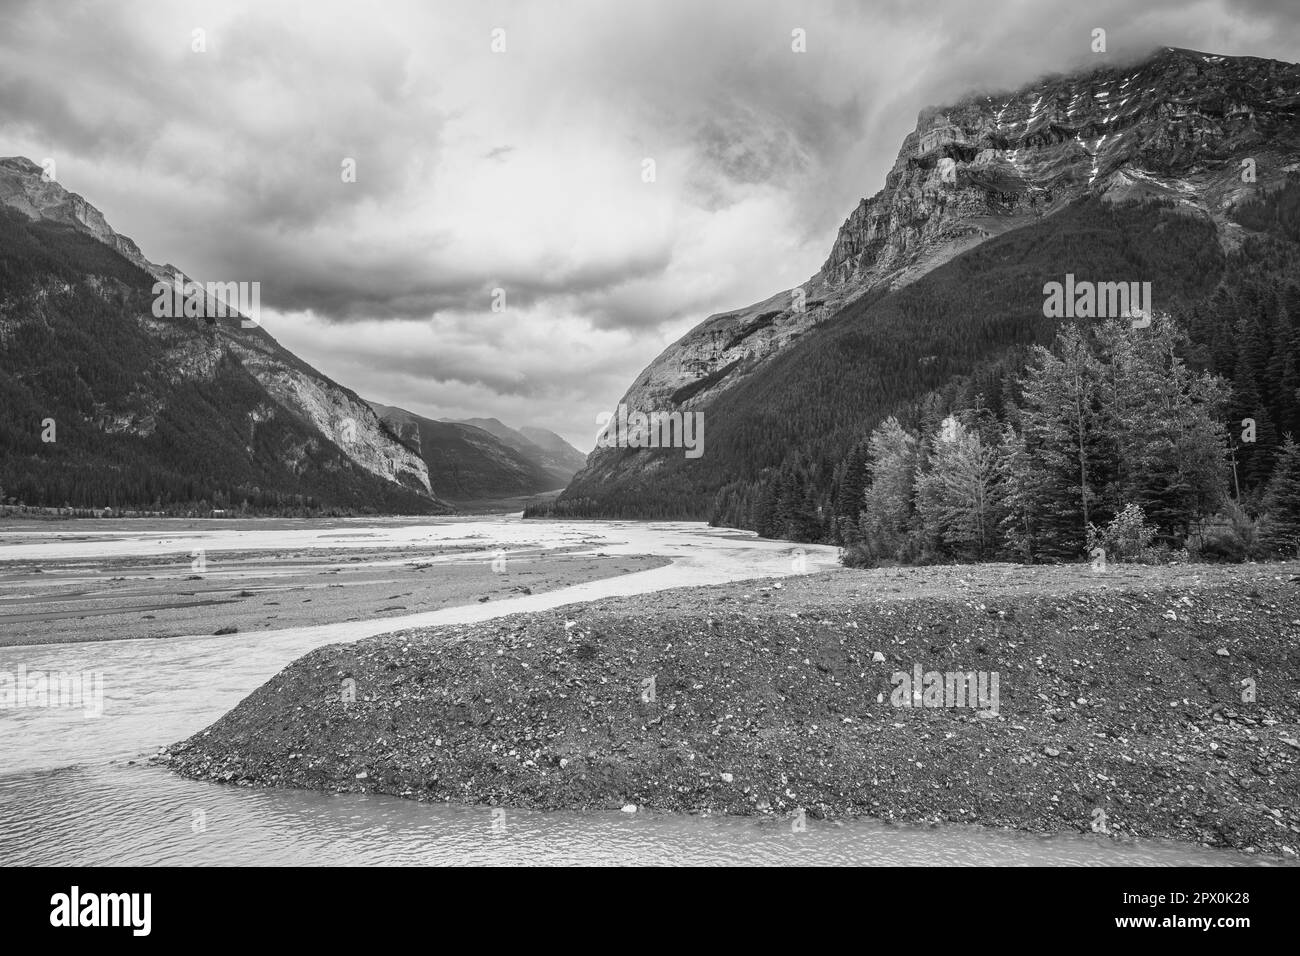 Bow River Valley at Fiield, British Columbia, Canada in the Rocky Mountains. Stock Photo